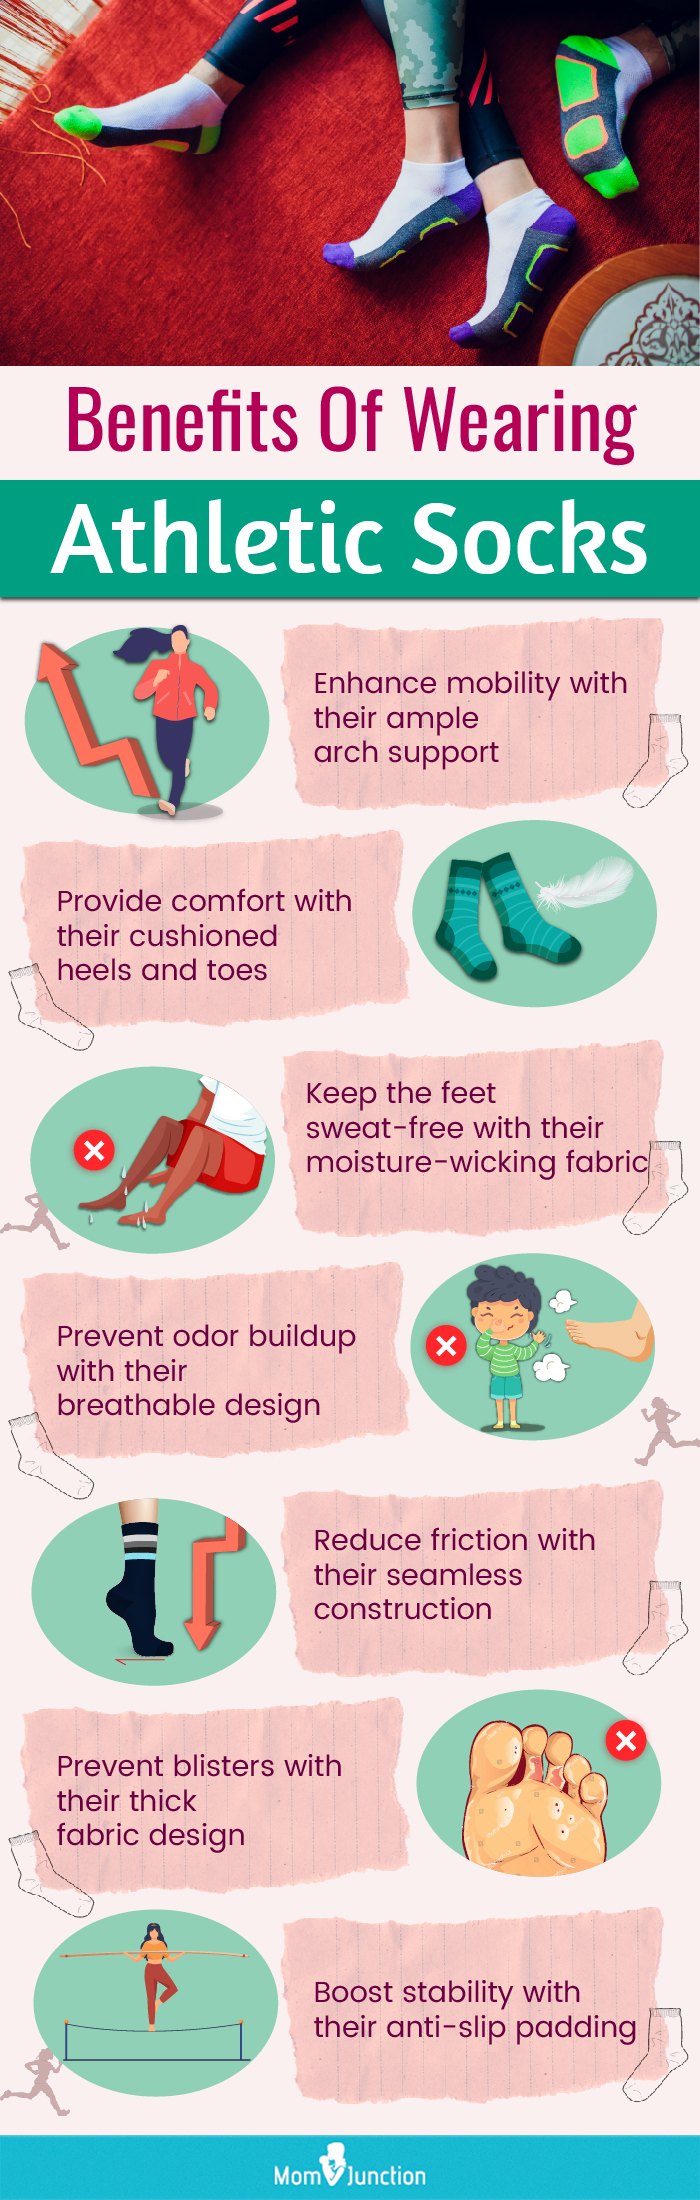 Benefits Of Wearing Athletic Socks (infographic)